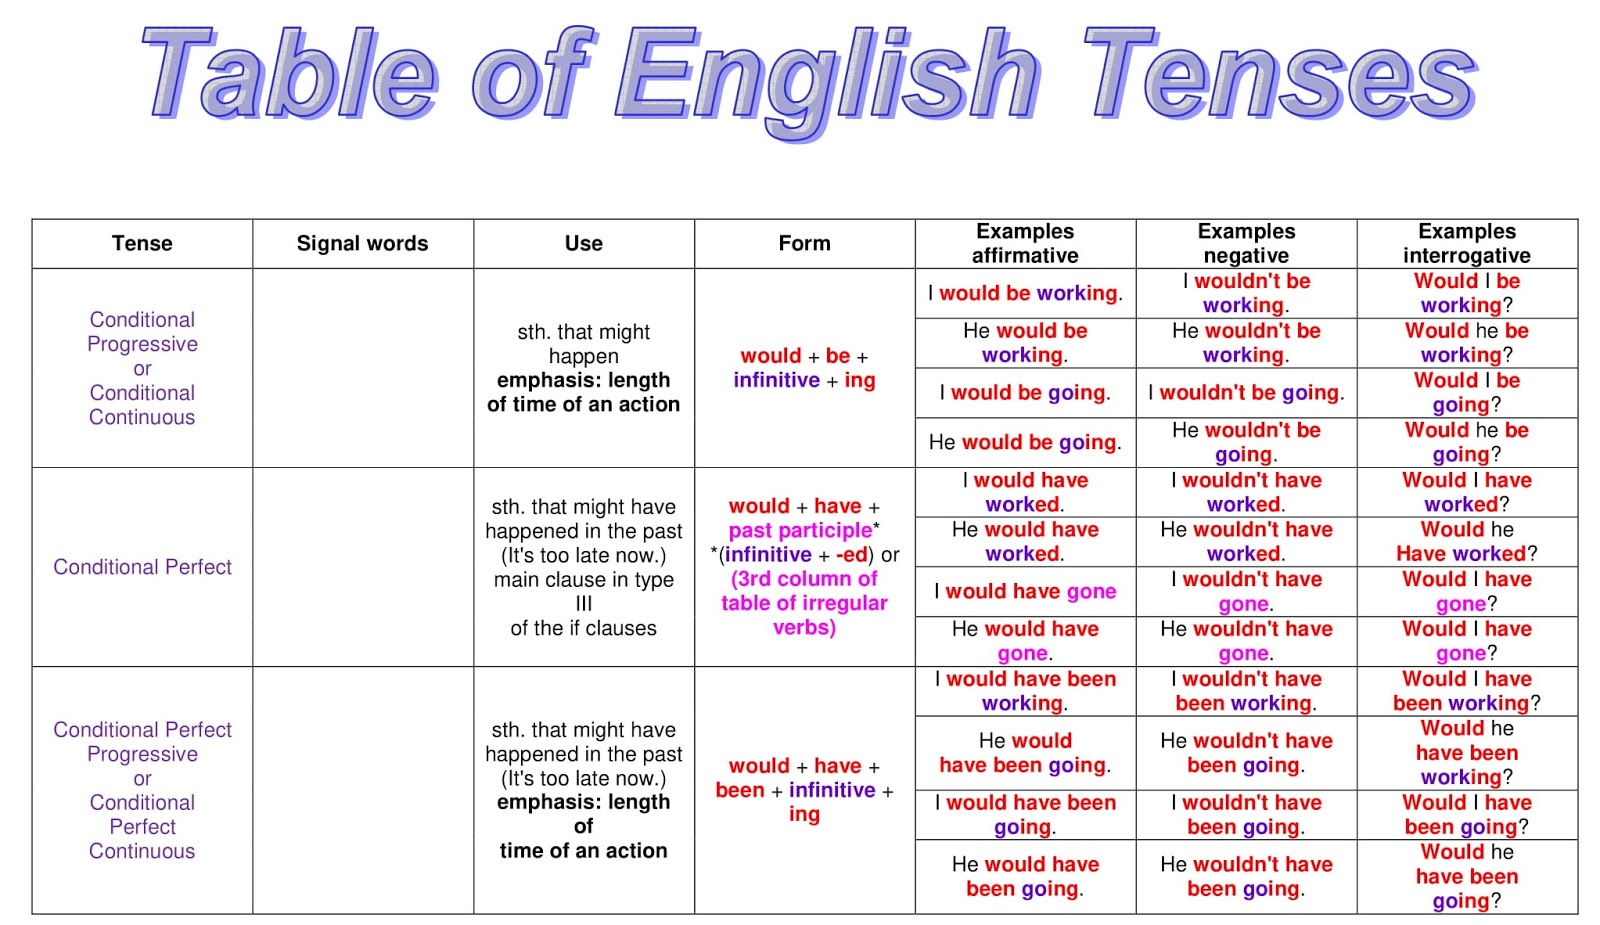 English Grammar A To Z: Table of English Tenses with example